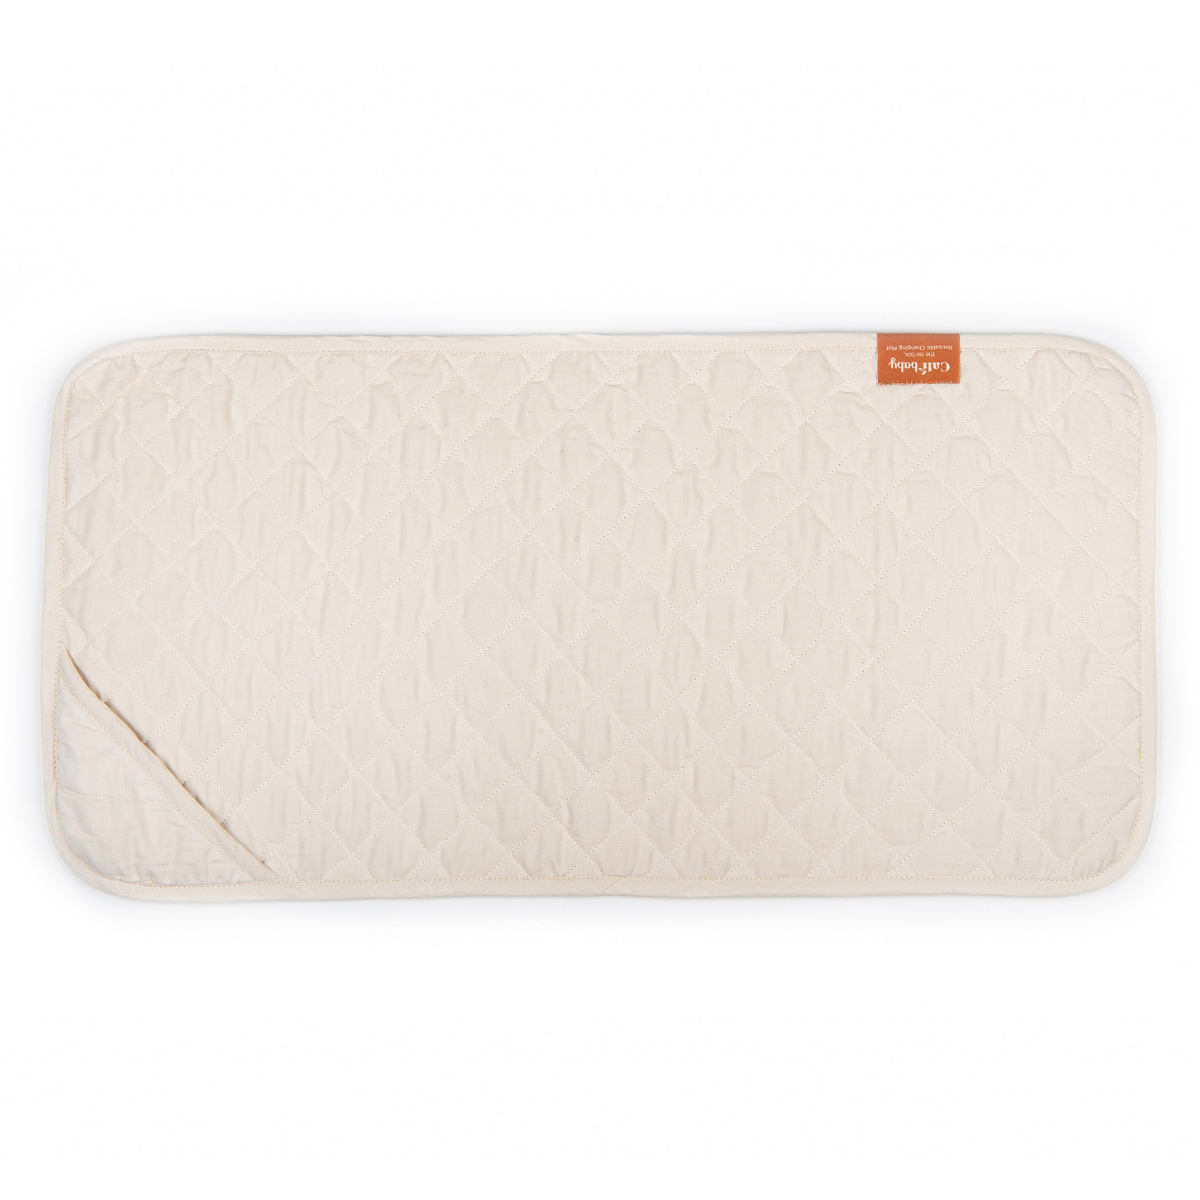 CaliBaby Reusable Changing Mat is the perfect addition to your eco-parenting toolkit.